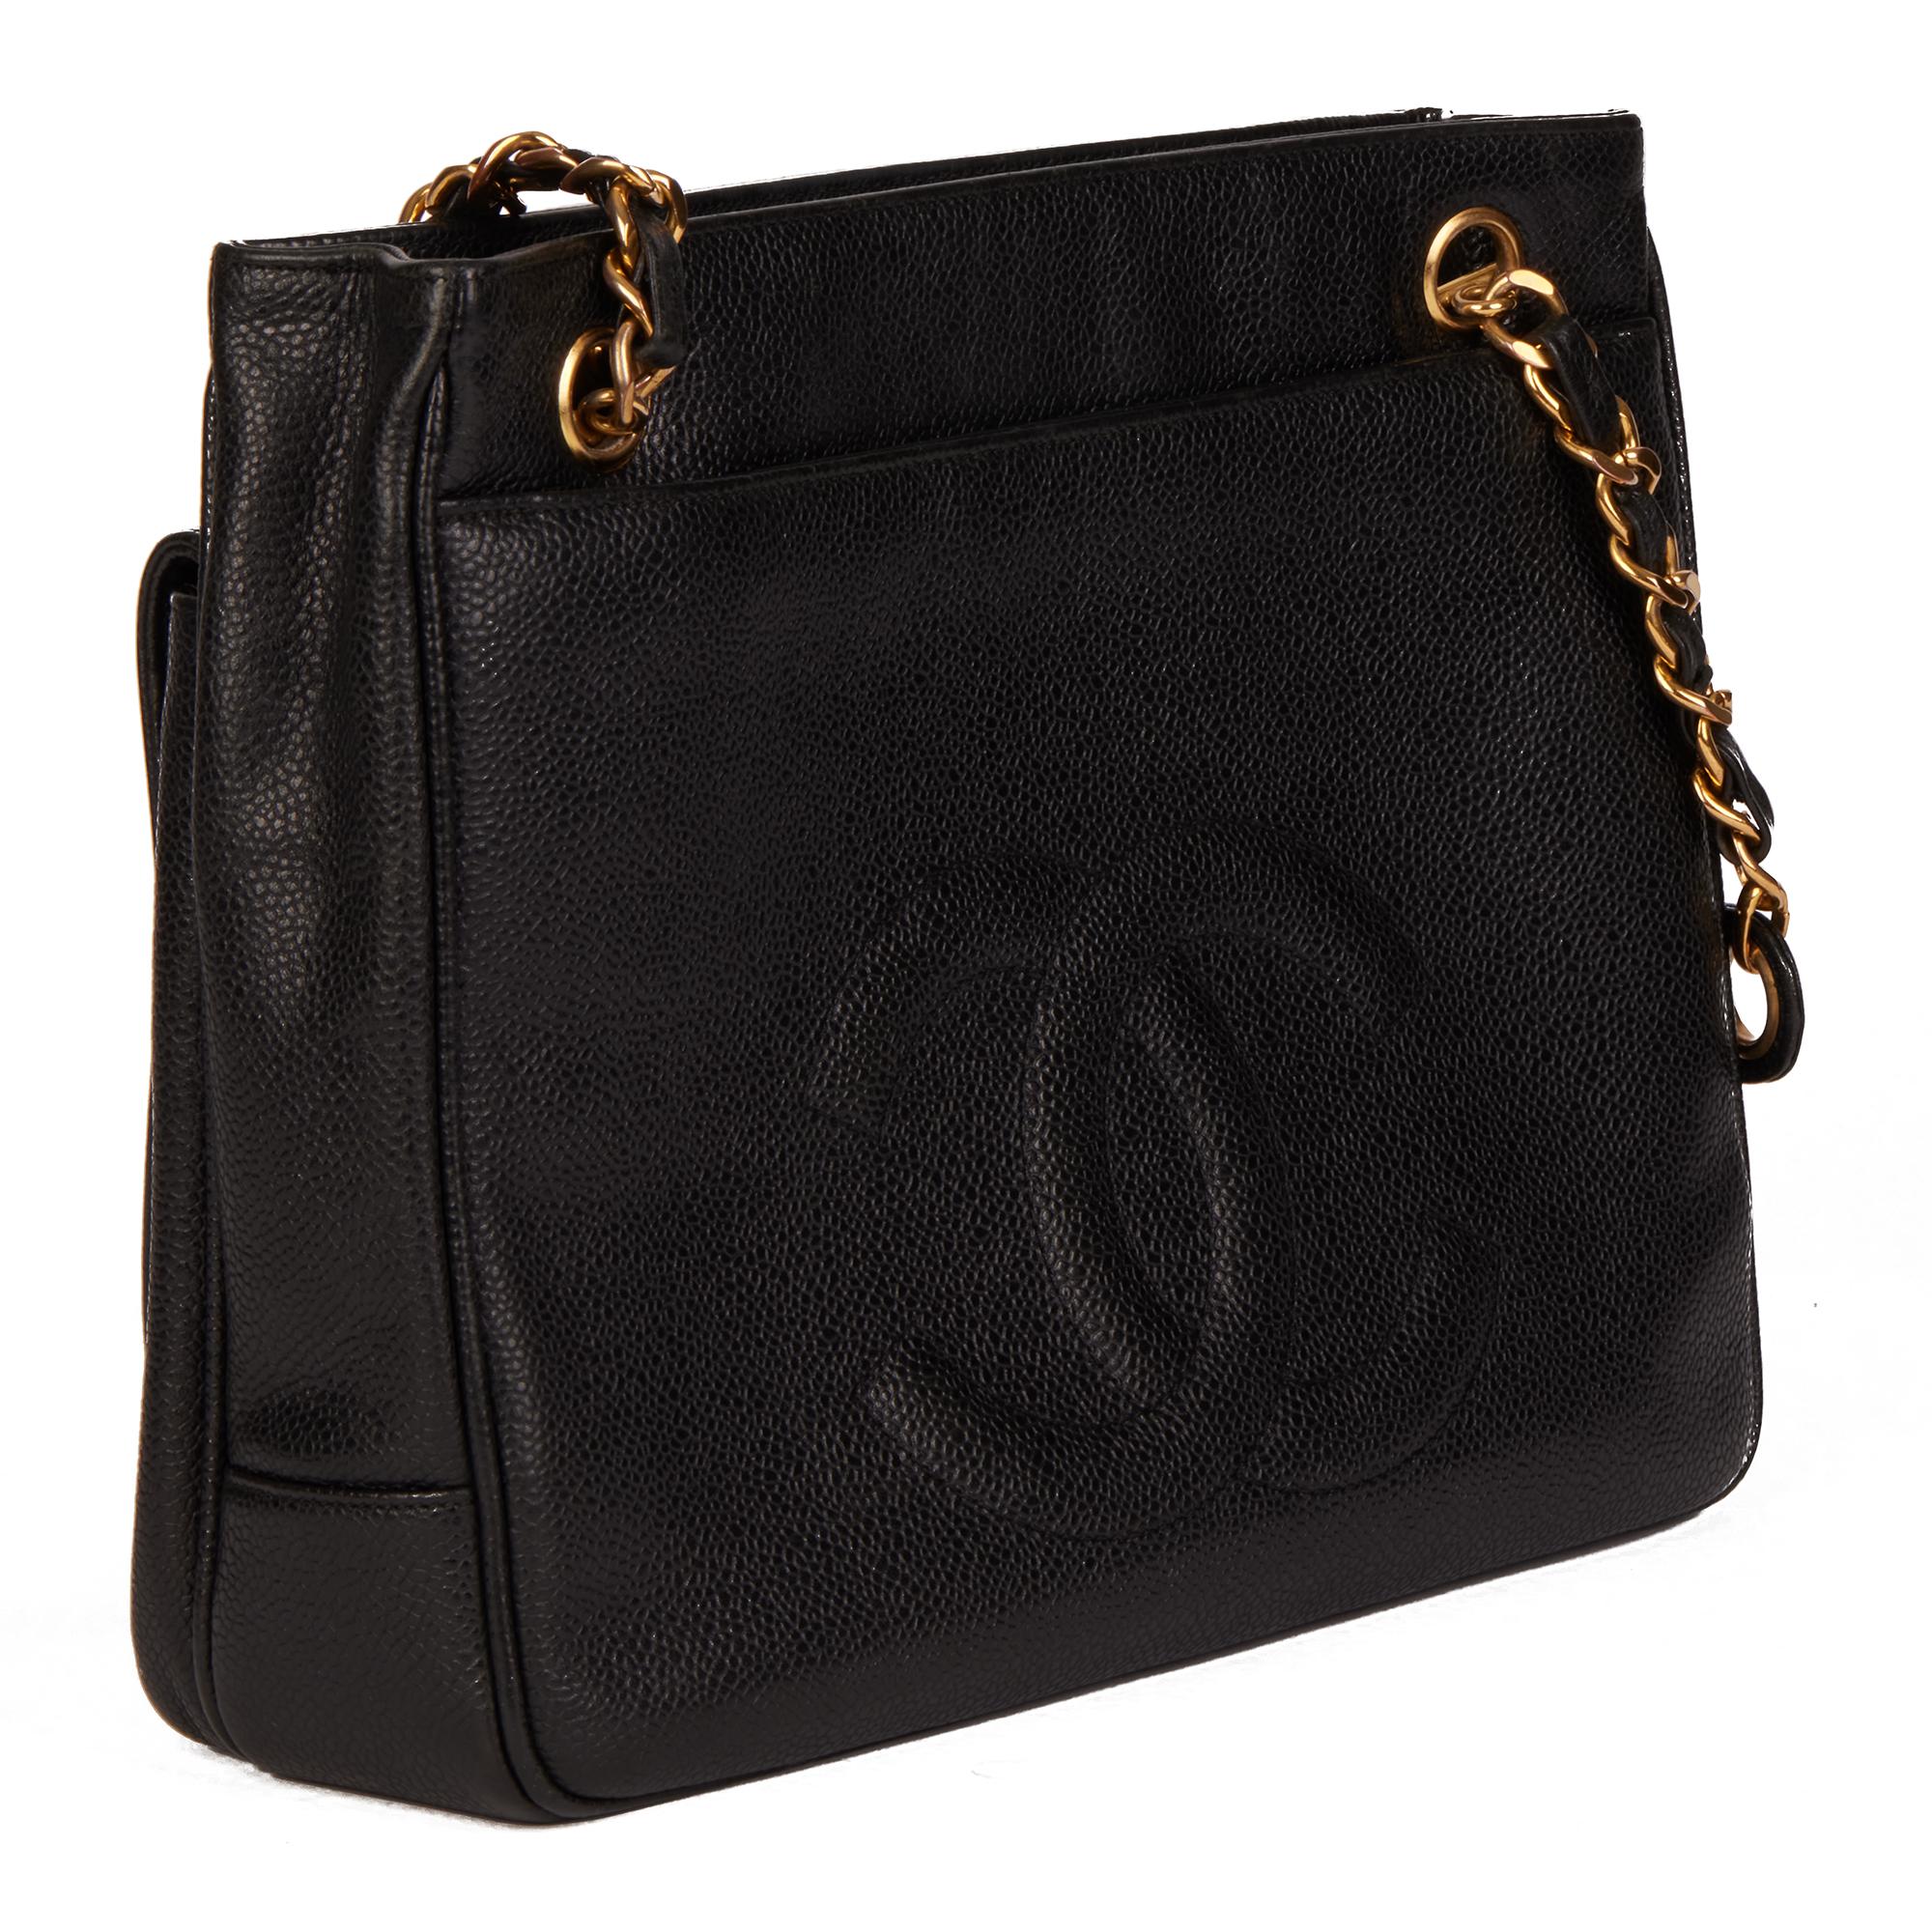 CHANEL
Black Caviar Leather Vintage Classic Shoulder Bag

Xupes Reference: HB4334
Serial Number: 4090540 (Not visible on the sticker)
Age (Circa): 1996
Accompanied By: Chanel Dust Bag, Authenticity Card
Authenticity Details: Authenticity Card,